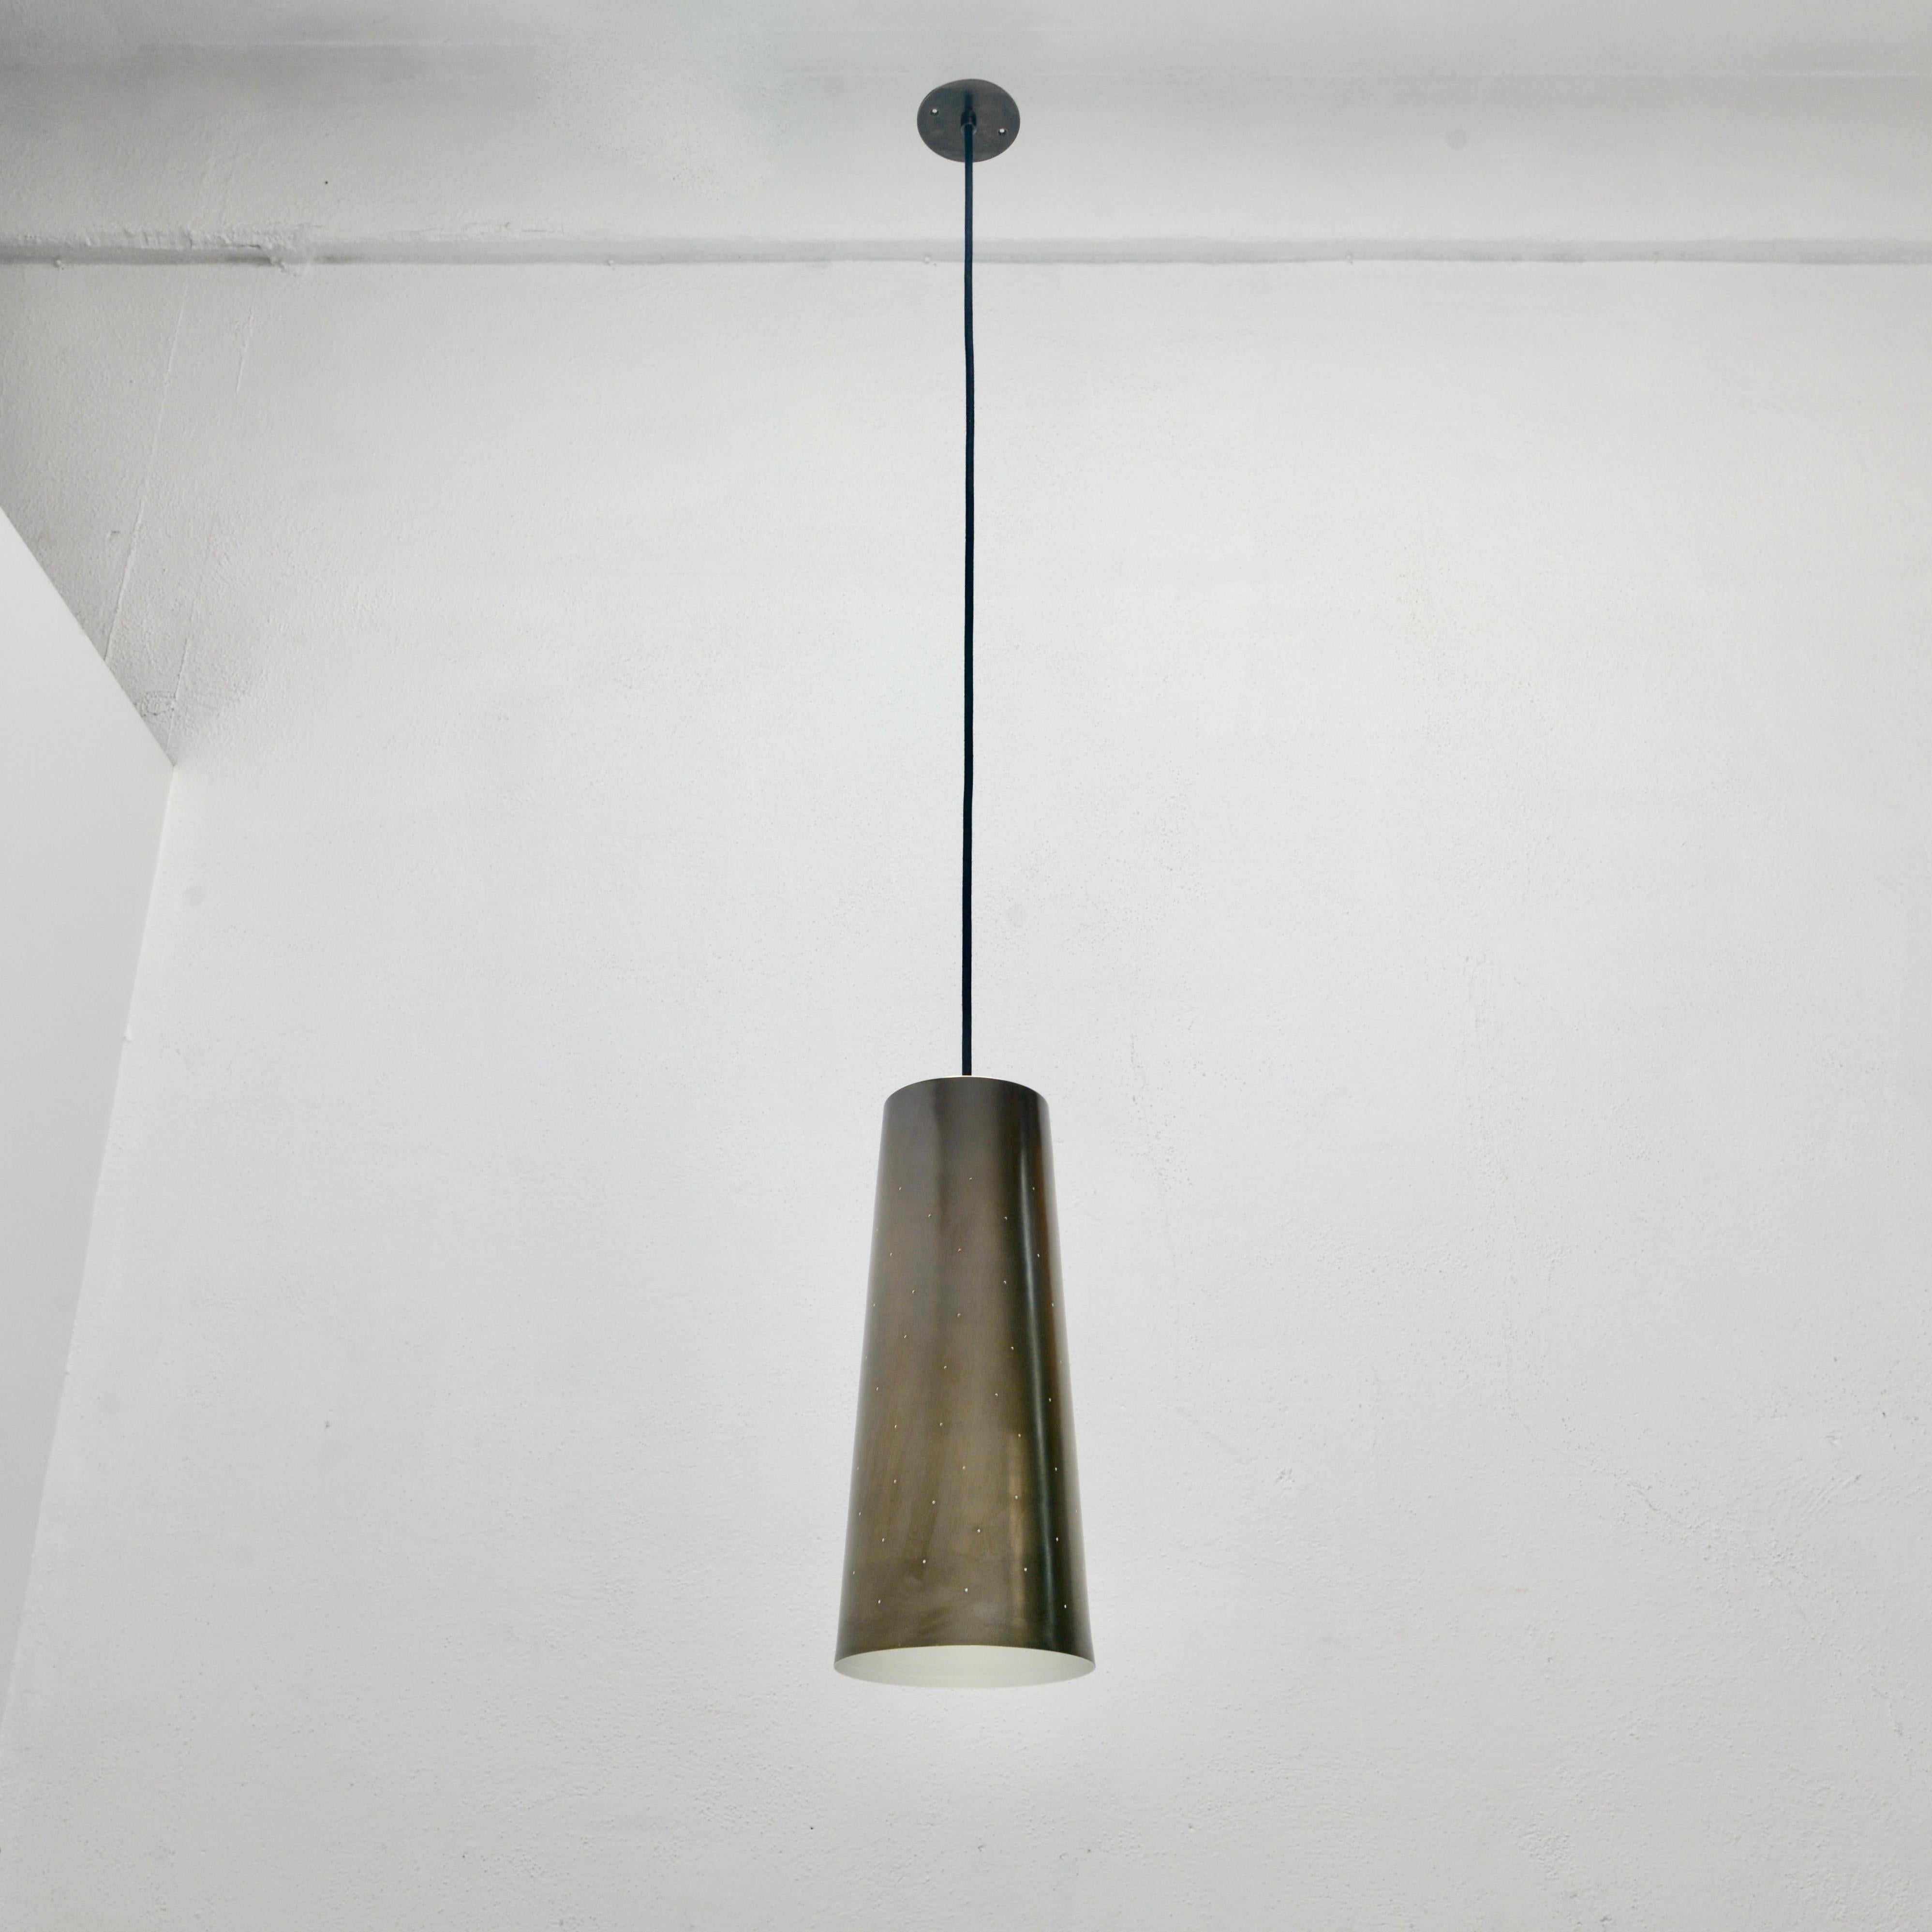 Fabulous large LUrco brass pendant with perforations. Made of solid brass. Interior is an off white painted finish and the exterior is un-lacquered patinated brass. Has a single medium based socket 100 watts maximum. OAD adjustable on site. Includes